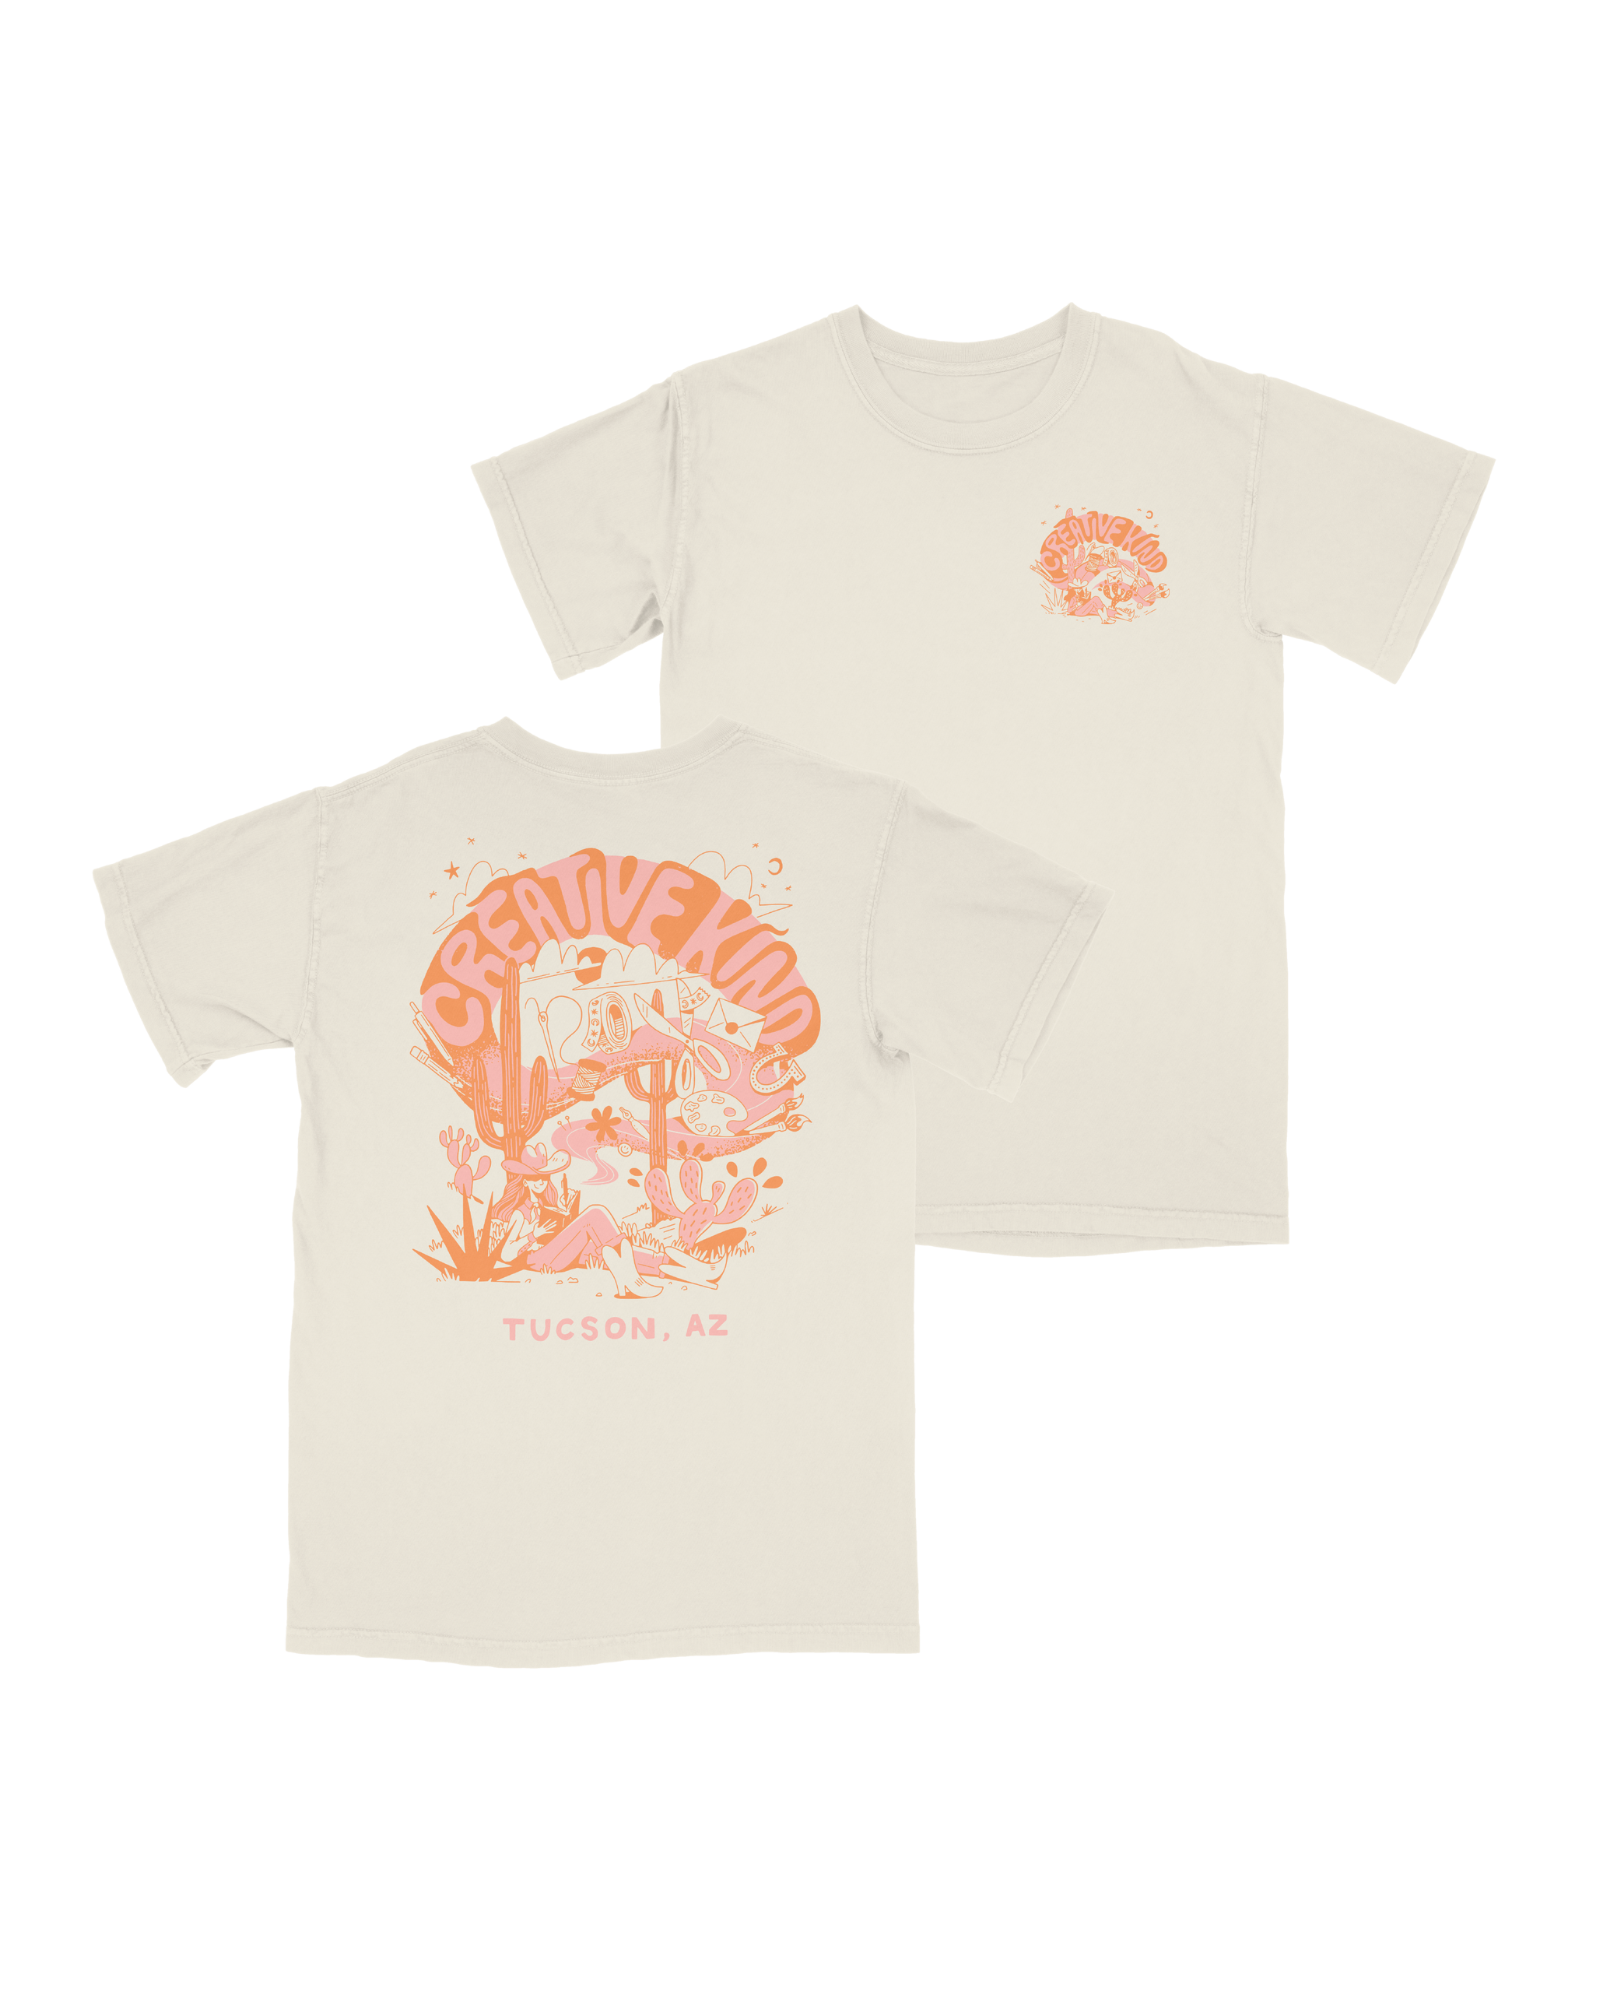 *Preorder* Creative Kind Limited Edition Anniversary Shirt